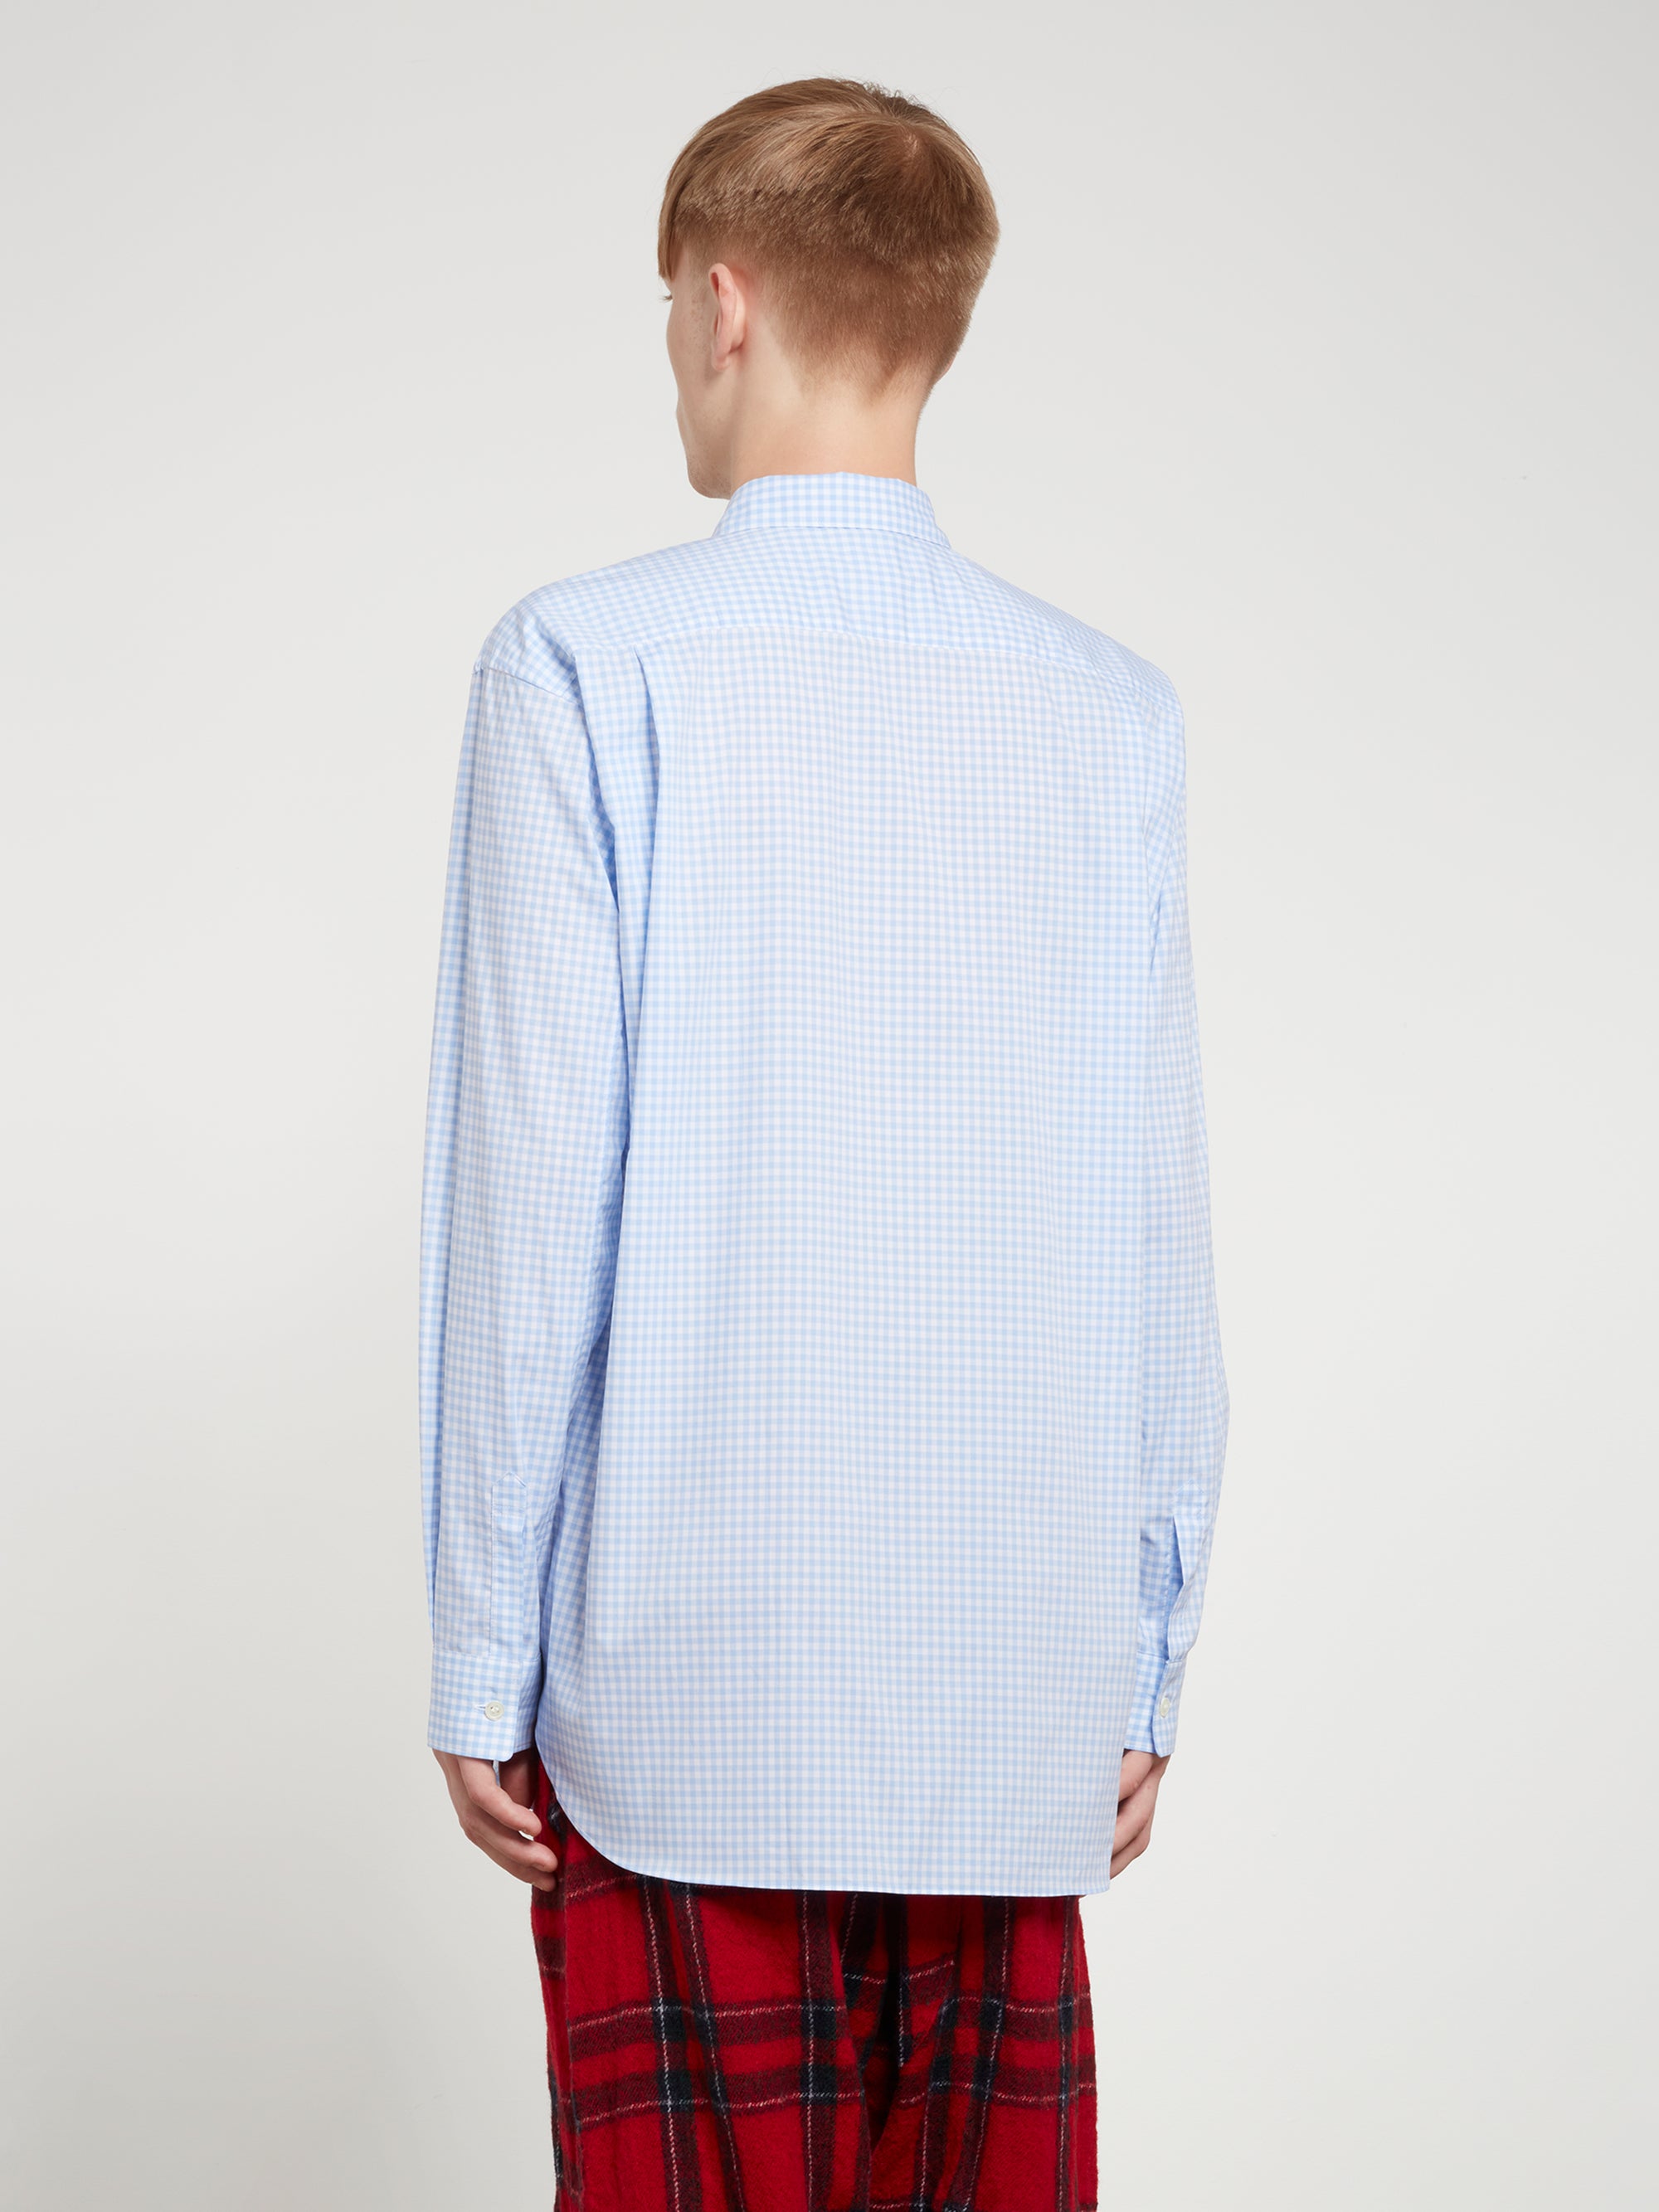 CDG Shirt Forever - Classic Fit Checked Shirt - (Blue) view 4